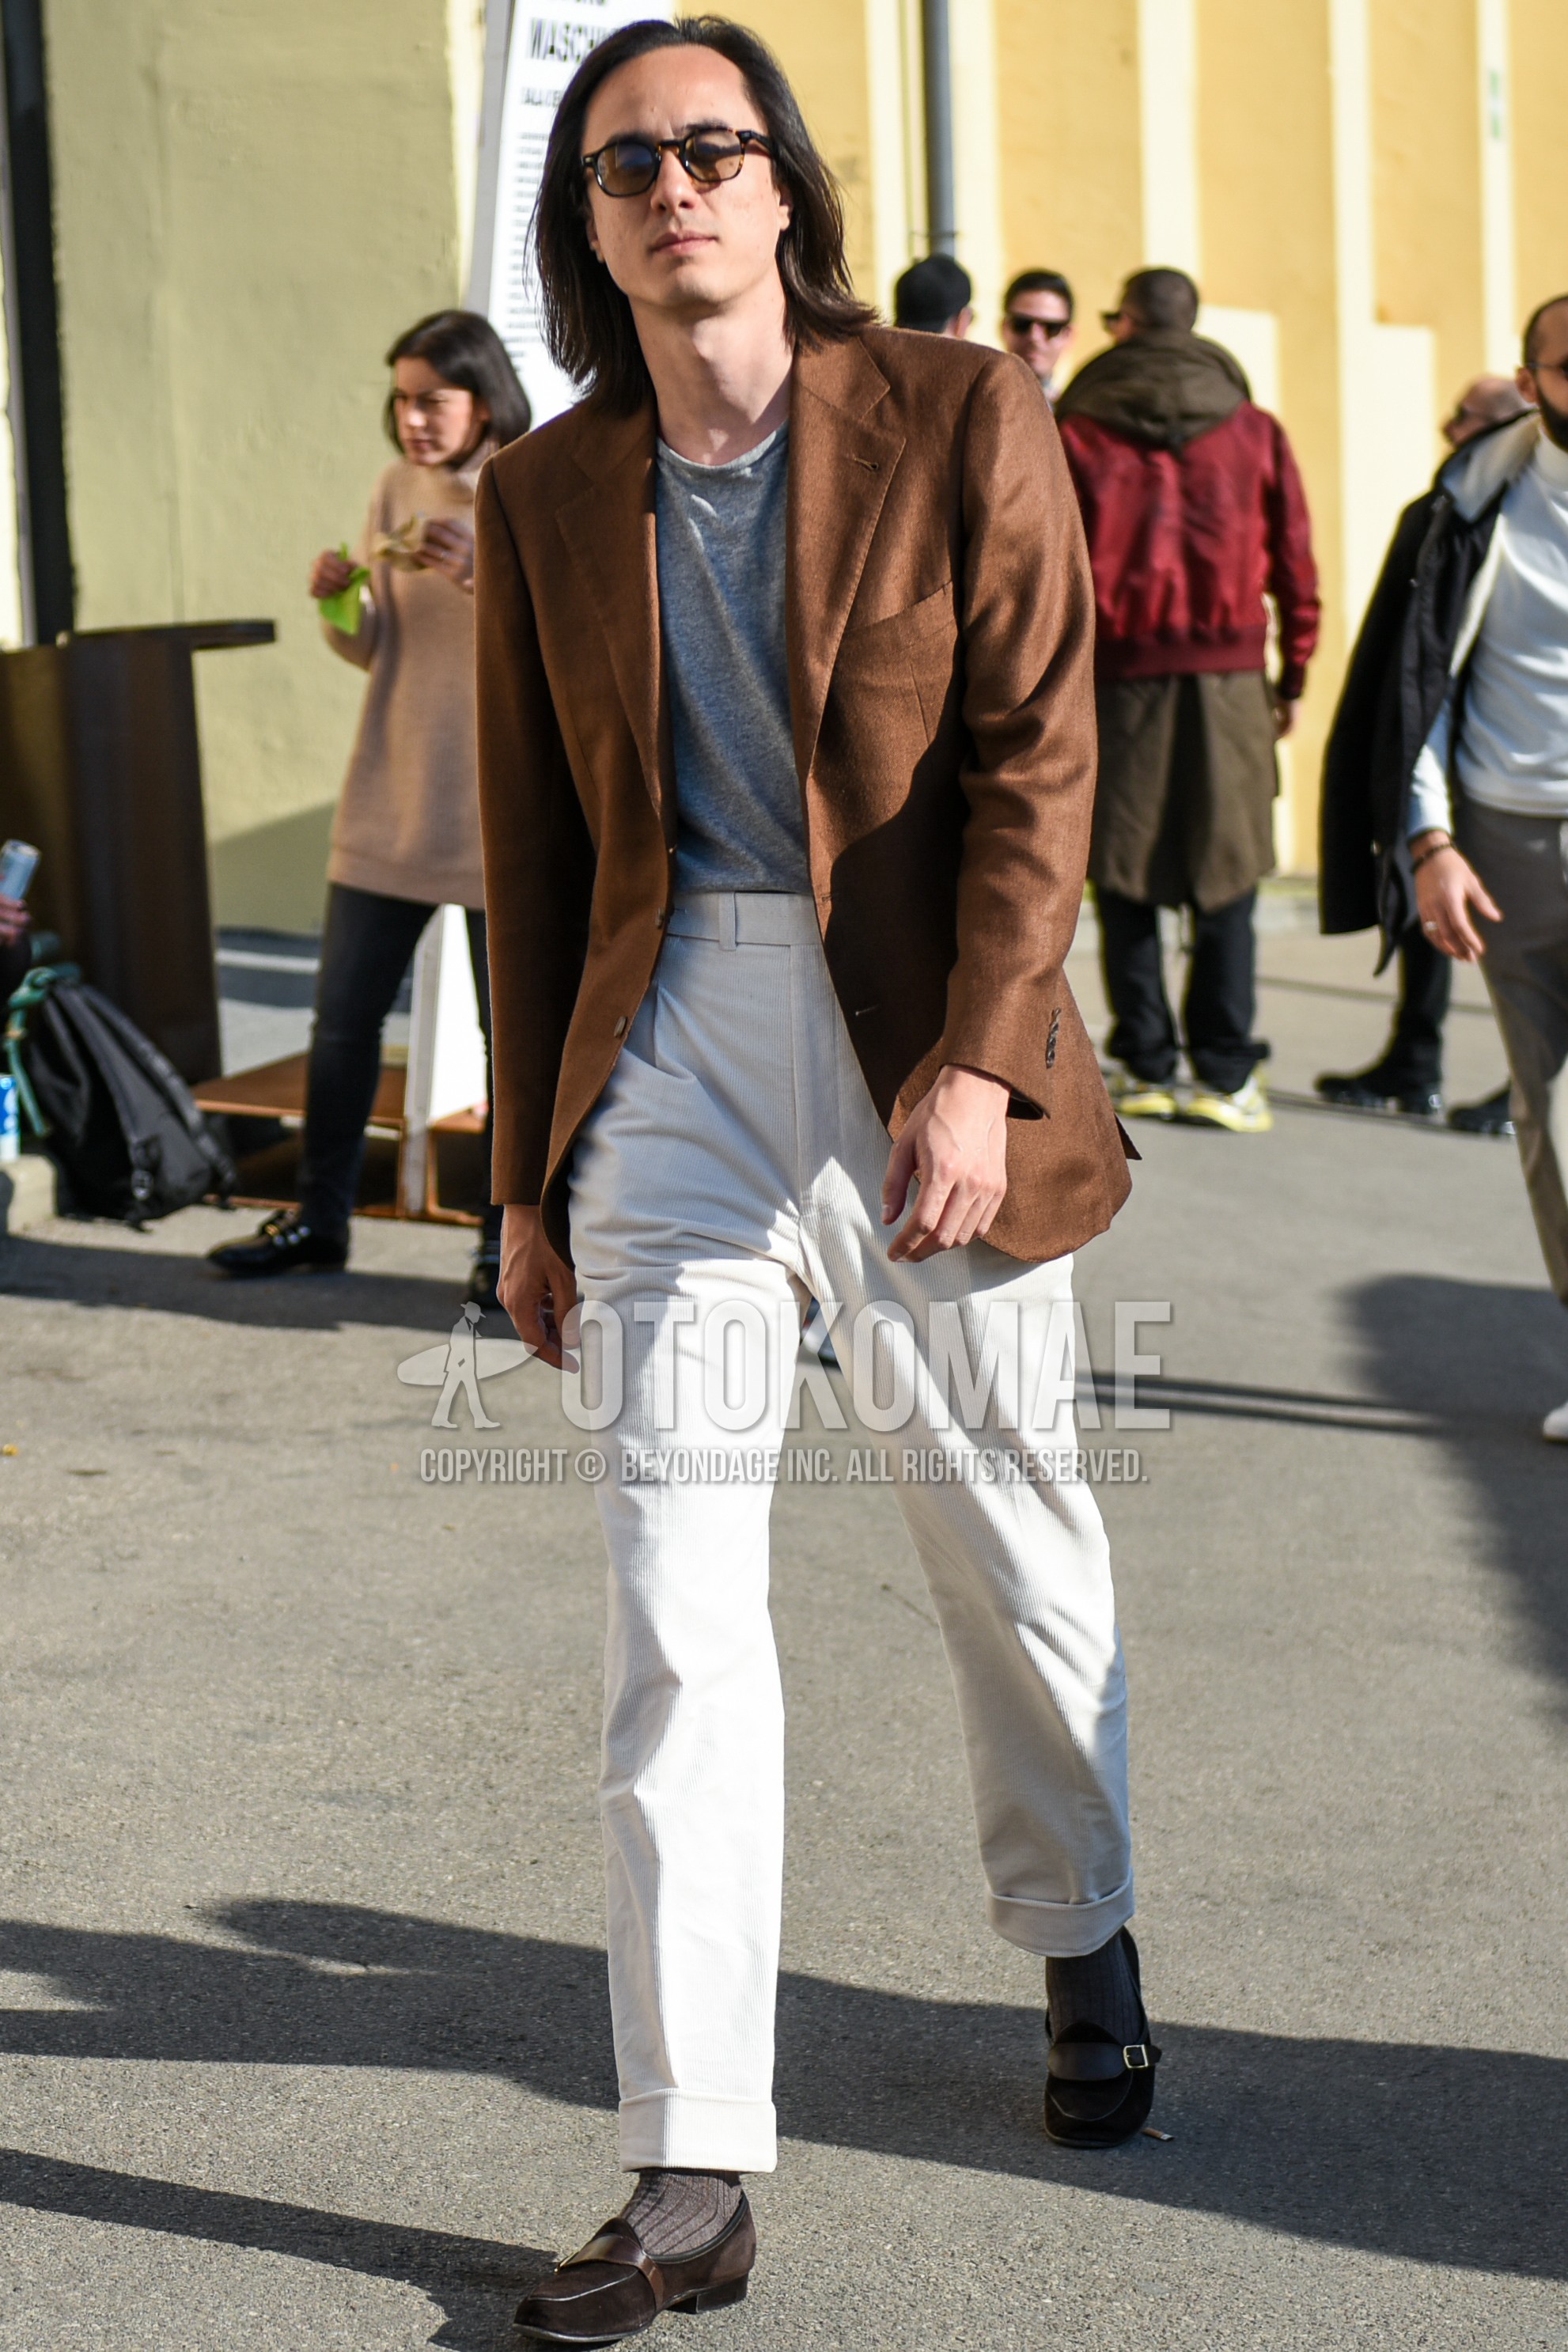 Men's spring autumn outfit with brown tortoiseshell glasses, brown plain tailored jacket, gray plain t-shirt, white plain slacks, gray plain socks, brown  loafers leather shoes.